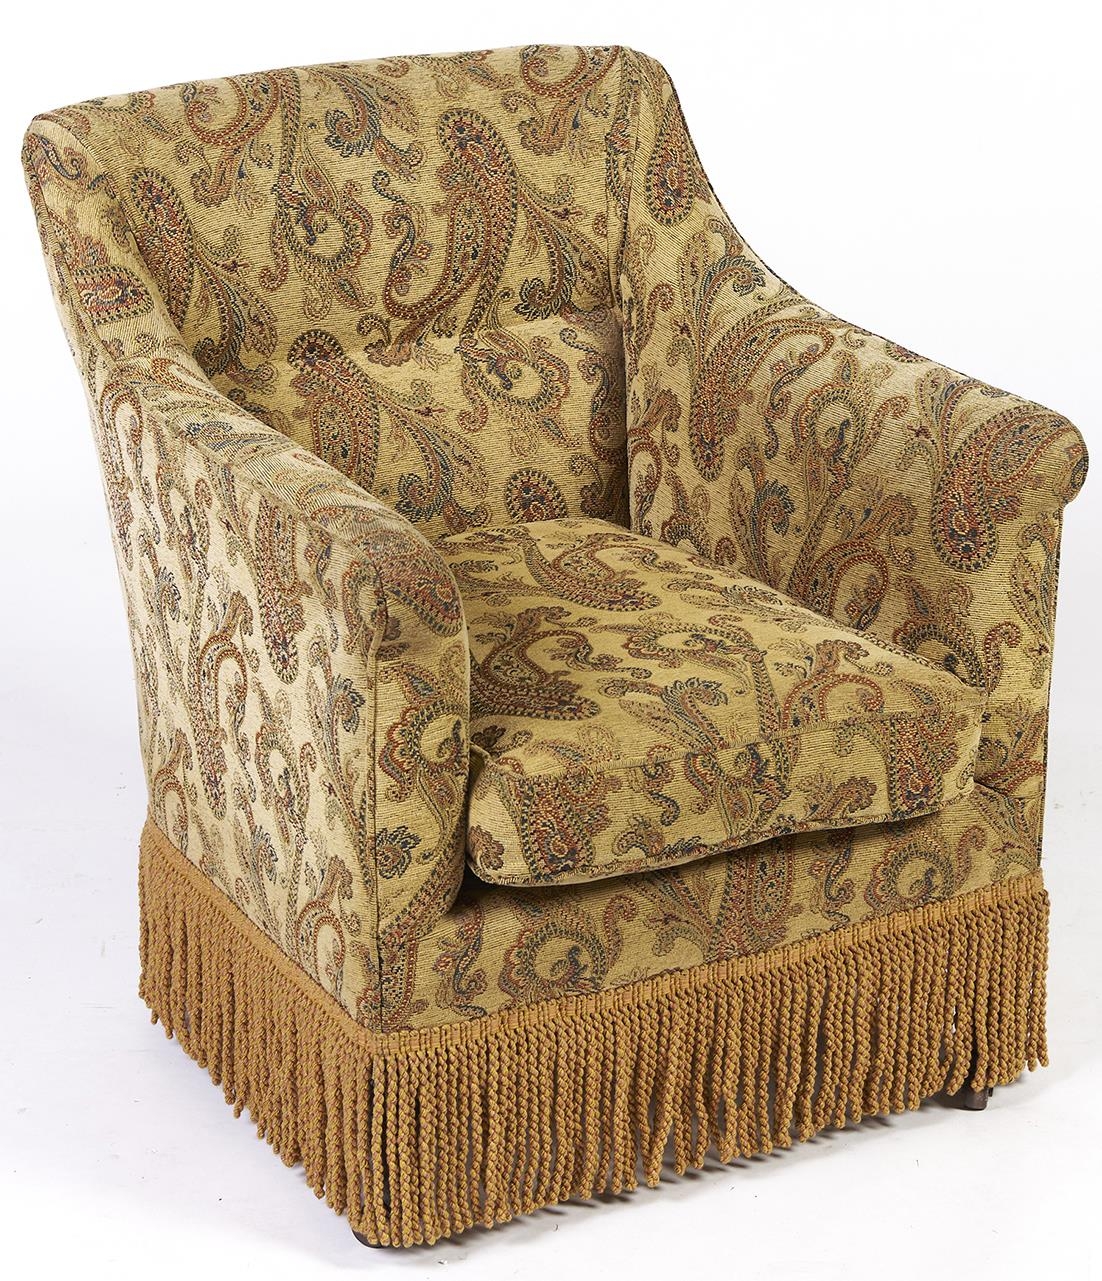 An Edwardian mahogany  chair, reupholstered in boteh decorated fabric, fringed, square tapered